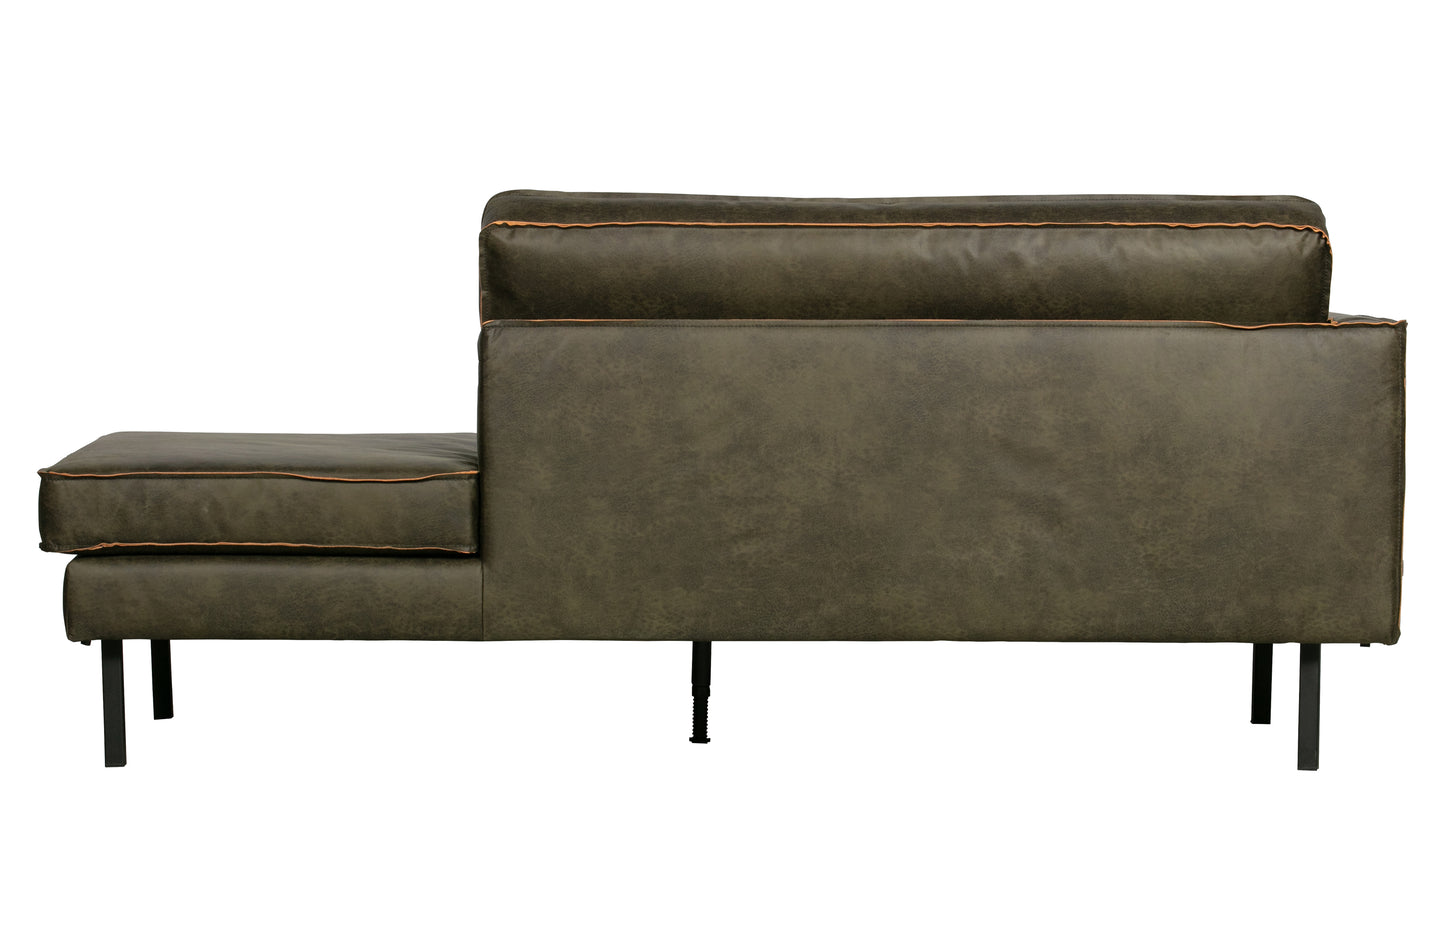 Rodeo - Daybed, Venstre, Army